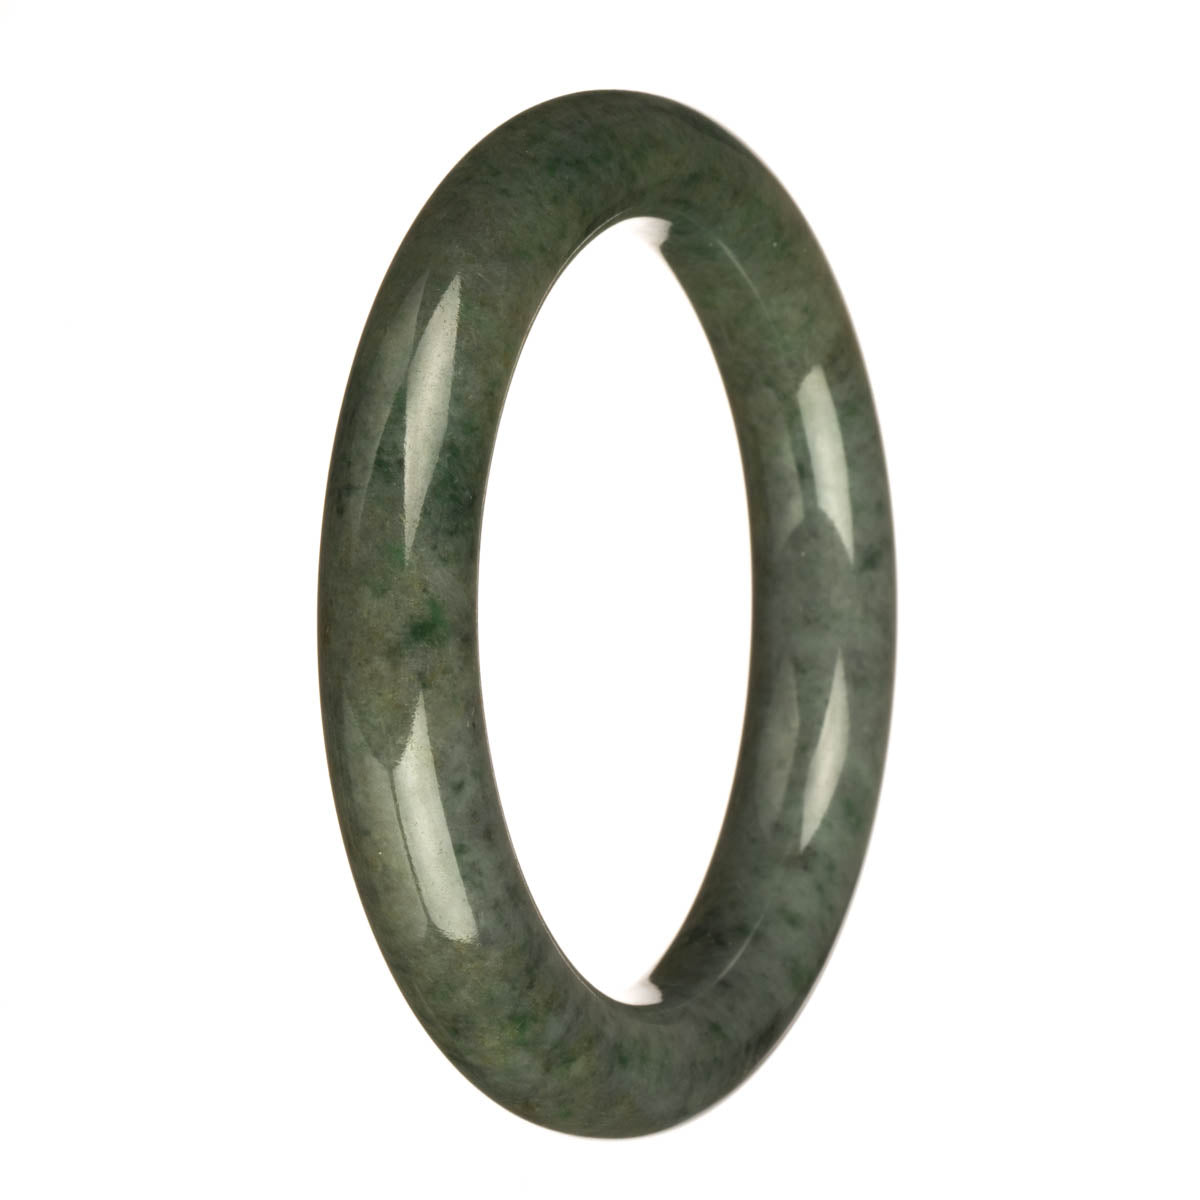 Real Grade A Grey with Apple Green Patterns Burma Jade Bracelet - 61mm Round